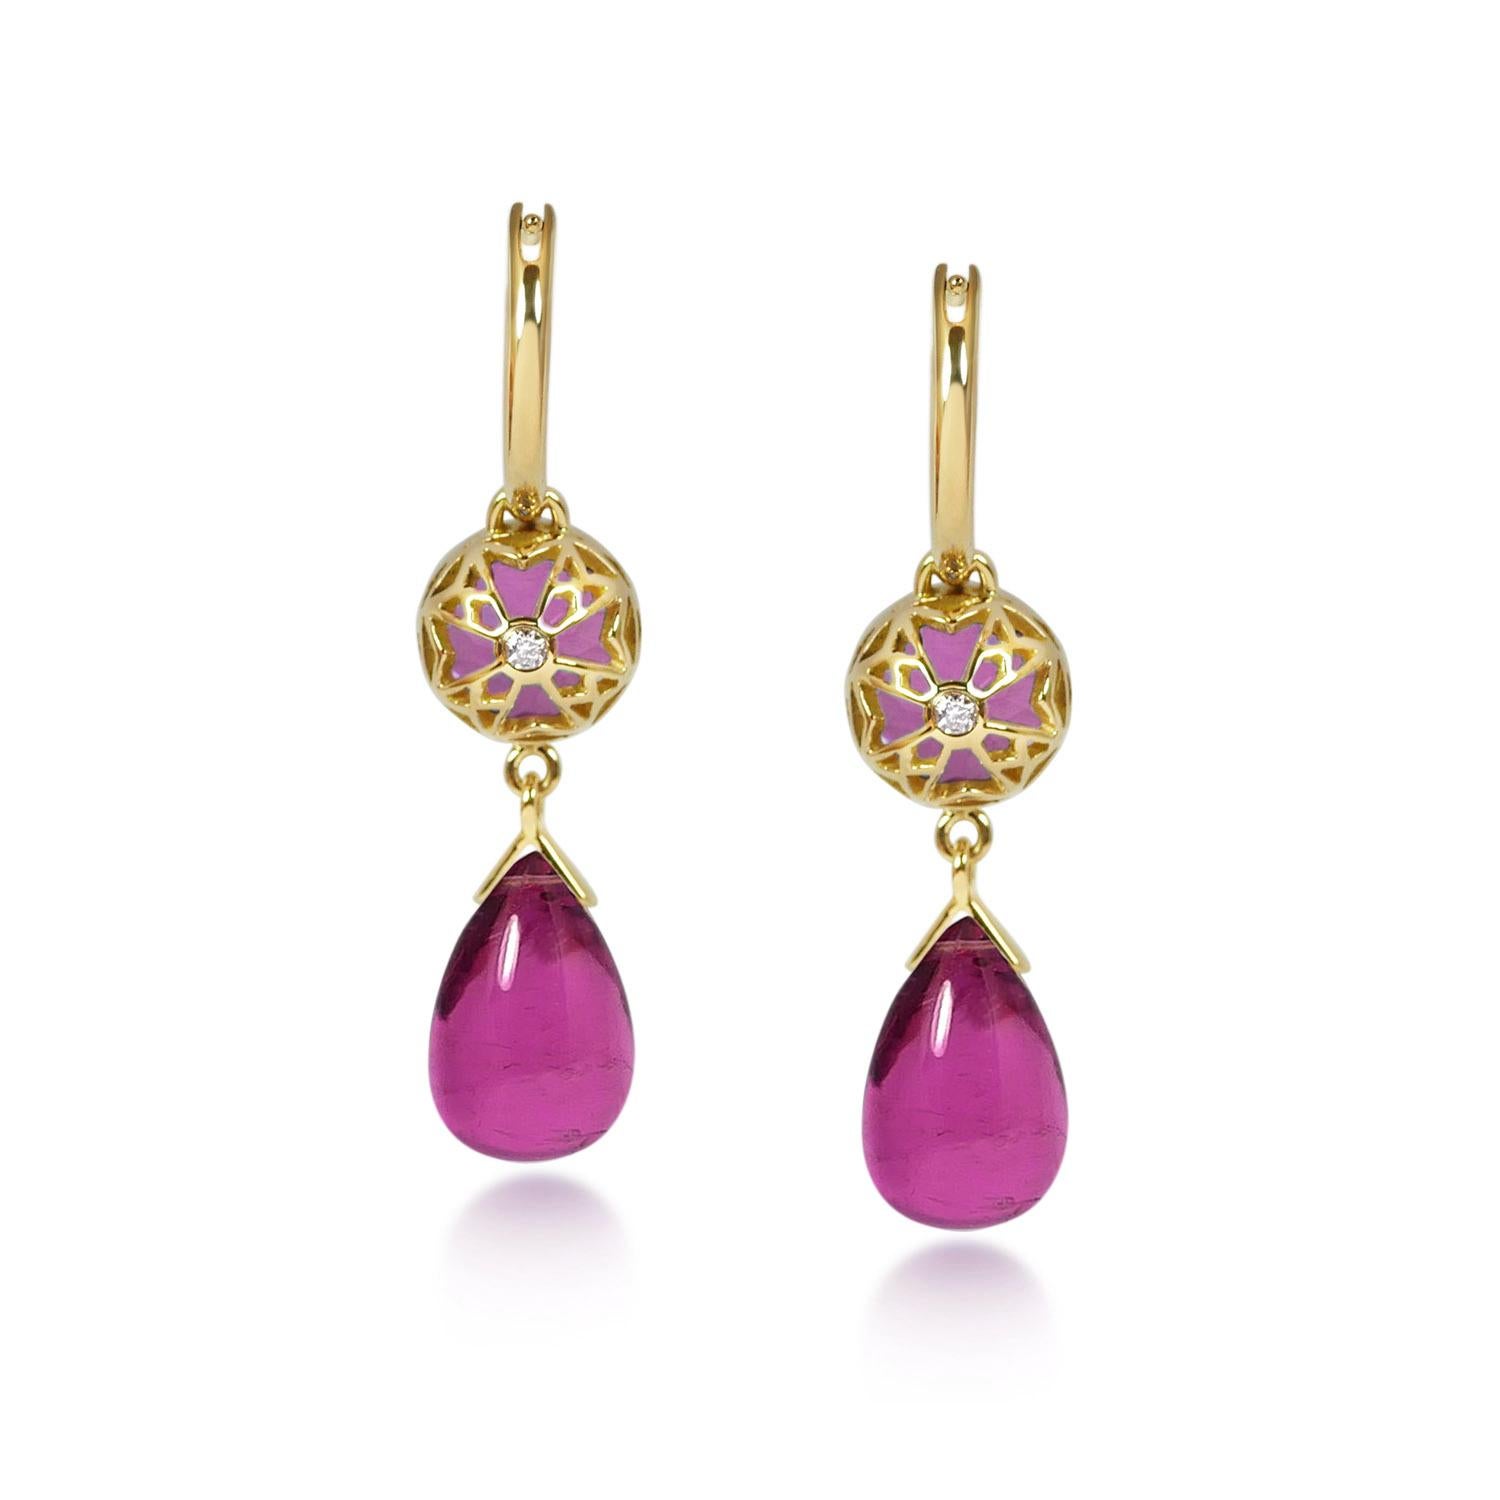 Handcrafted 2.60 & 7.10 Carats Pink Tourmalines 18 Karat Yellow Gold Drop Earrings. Dancing drops carved in Pink Tourmaline under a set of 8mm round cut Pink Tourmaline stones encased in our iconic hand pierced gold lace to let the light through. A